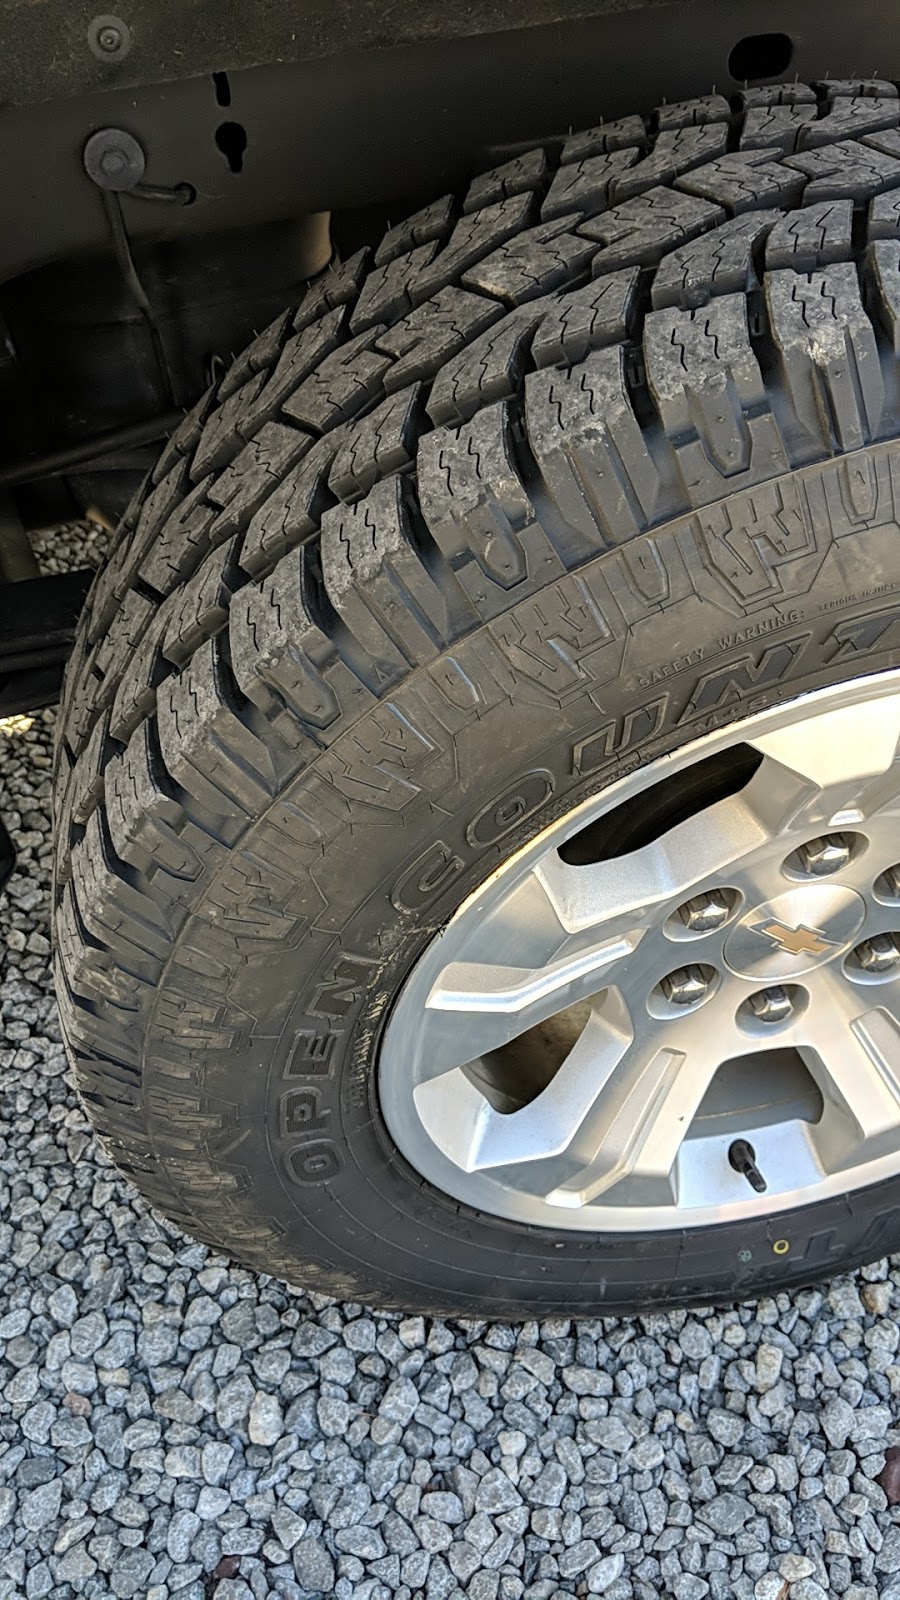 Meyers Mobile Tire Services | 600 New York Ave, Rochester, PA 15074, USA | Phone: (724) 775-2141